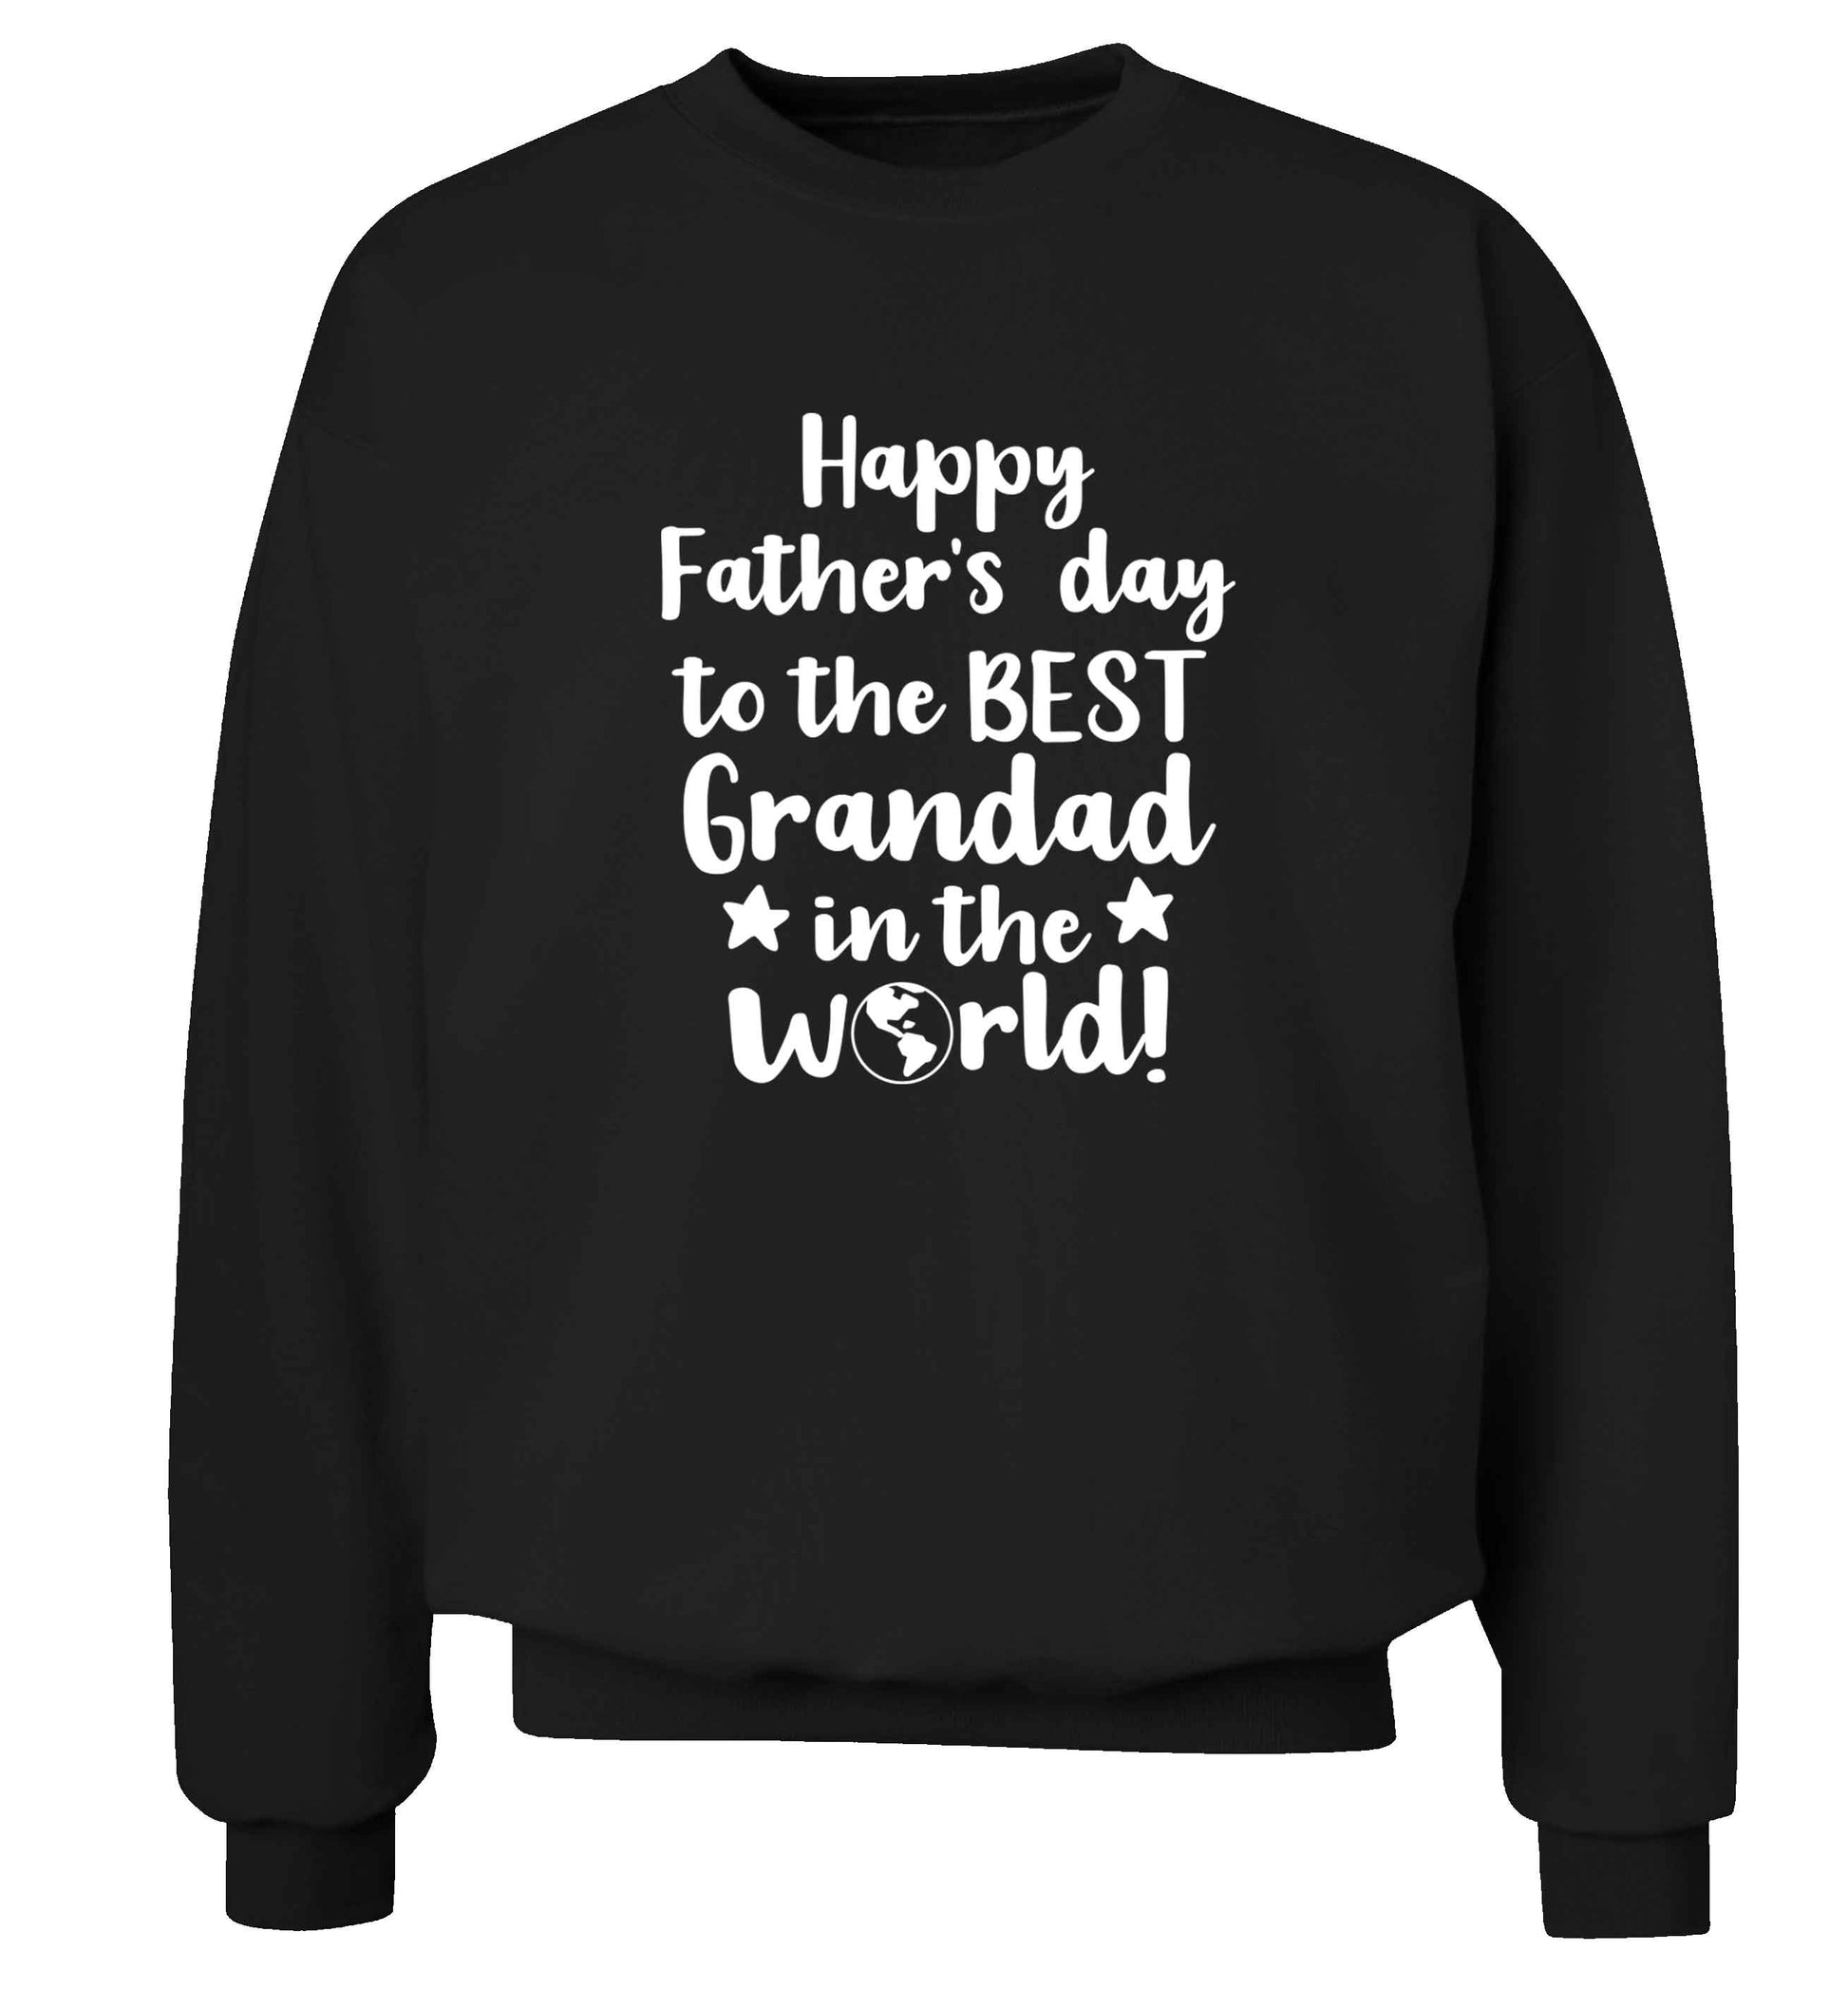 Happy Father's day to the best grandad in the world adult's unisex black sweater 2XL